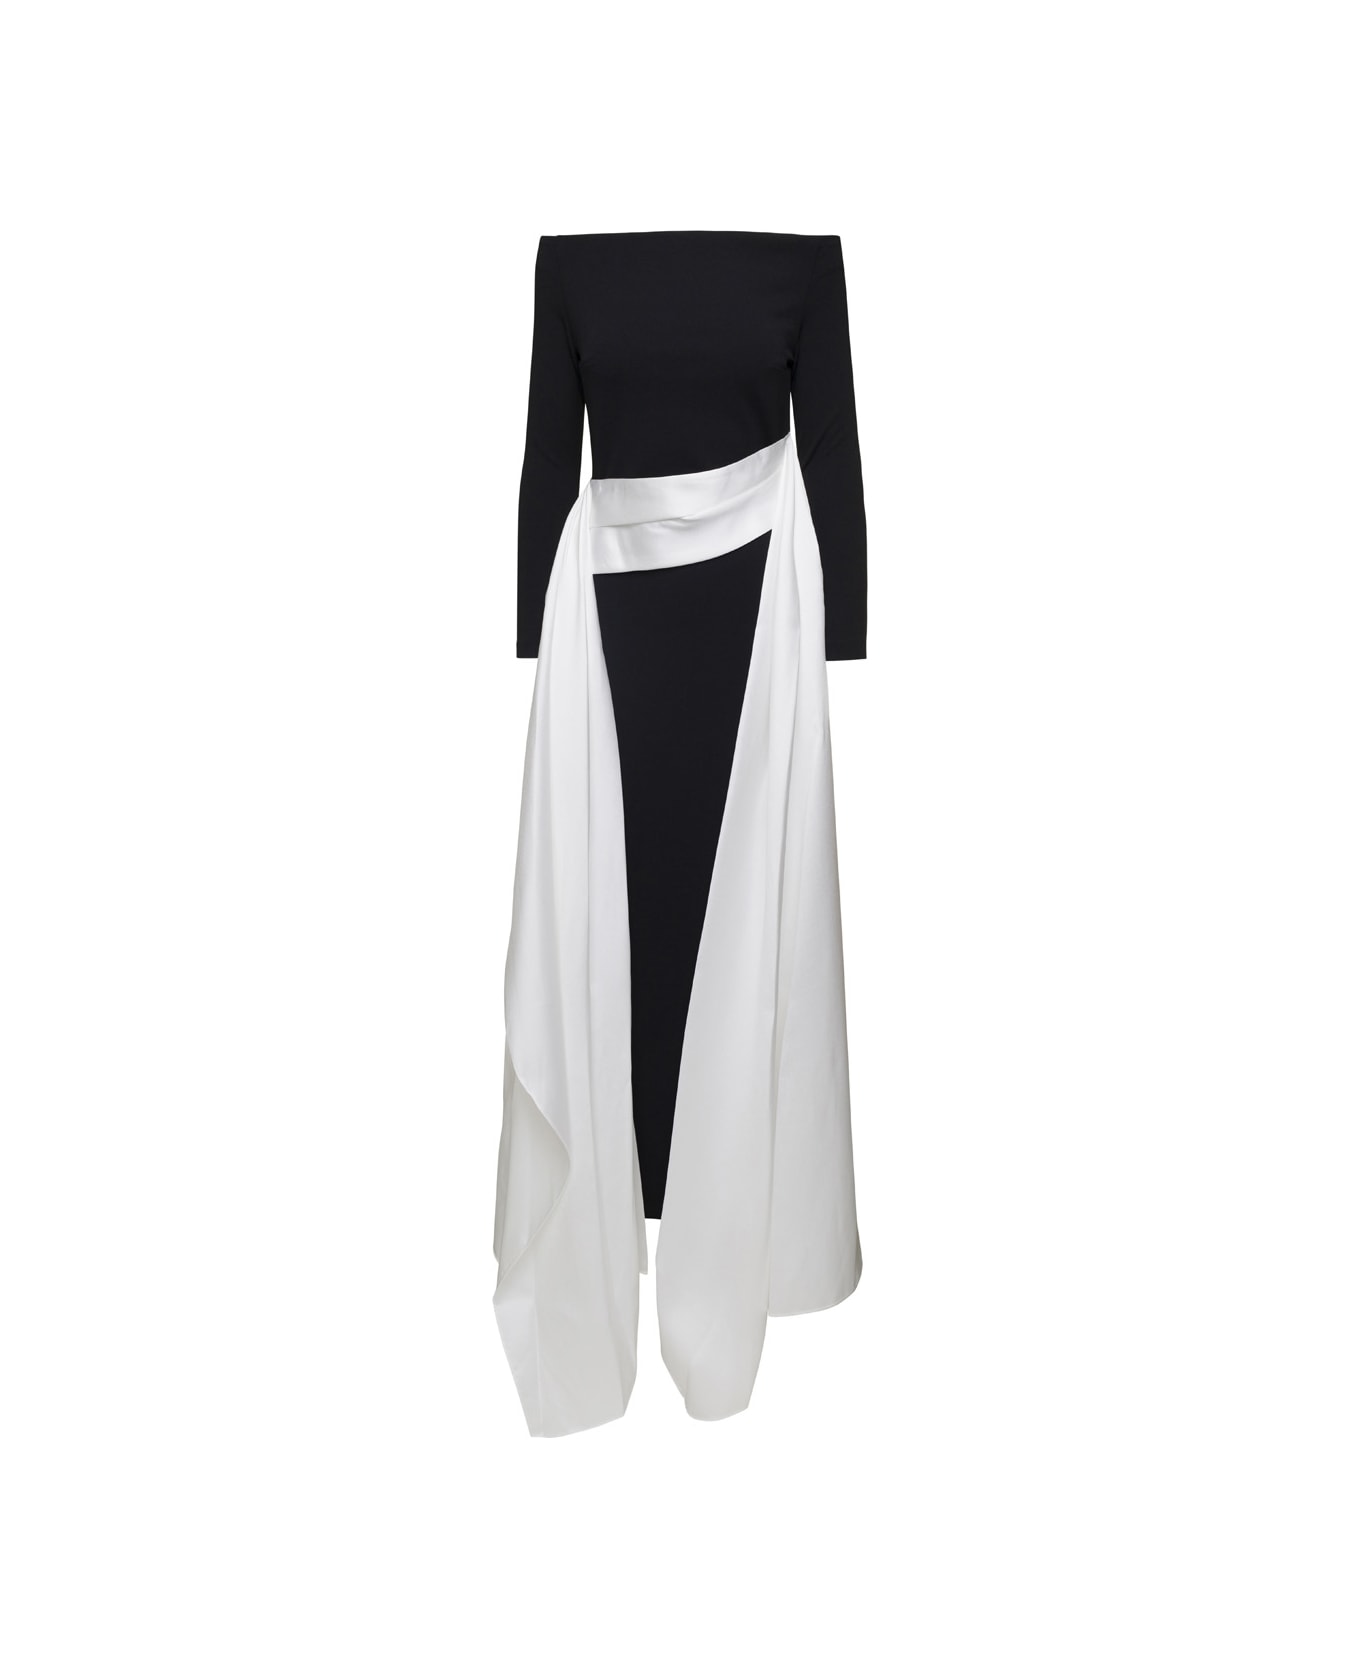 Solace London Black And White Long Dress With Train In Techno Fabric Stretch Woman - Black ワンピース＆ドレス